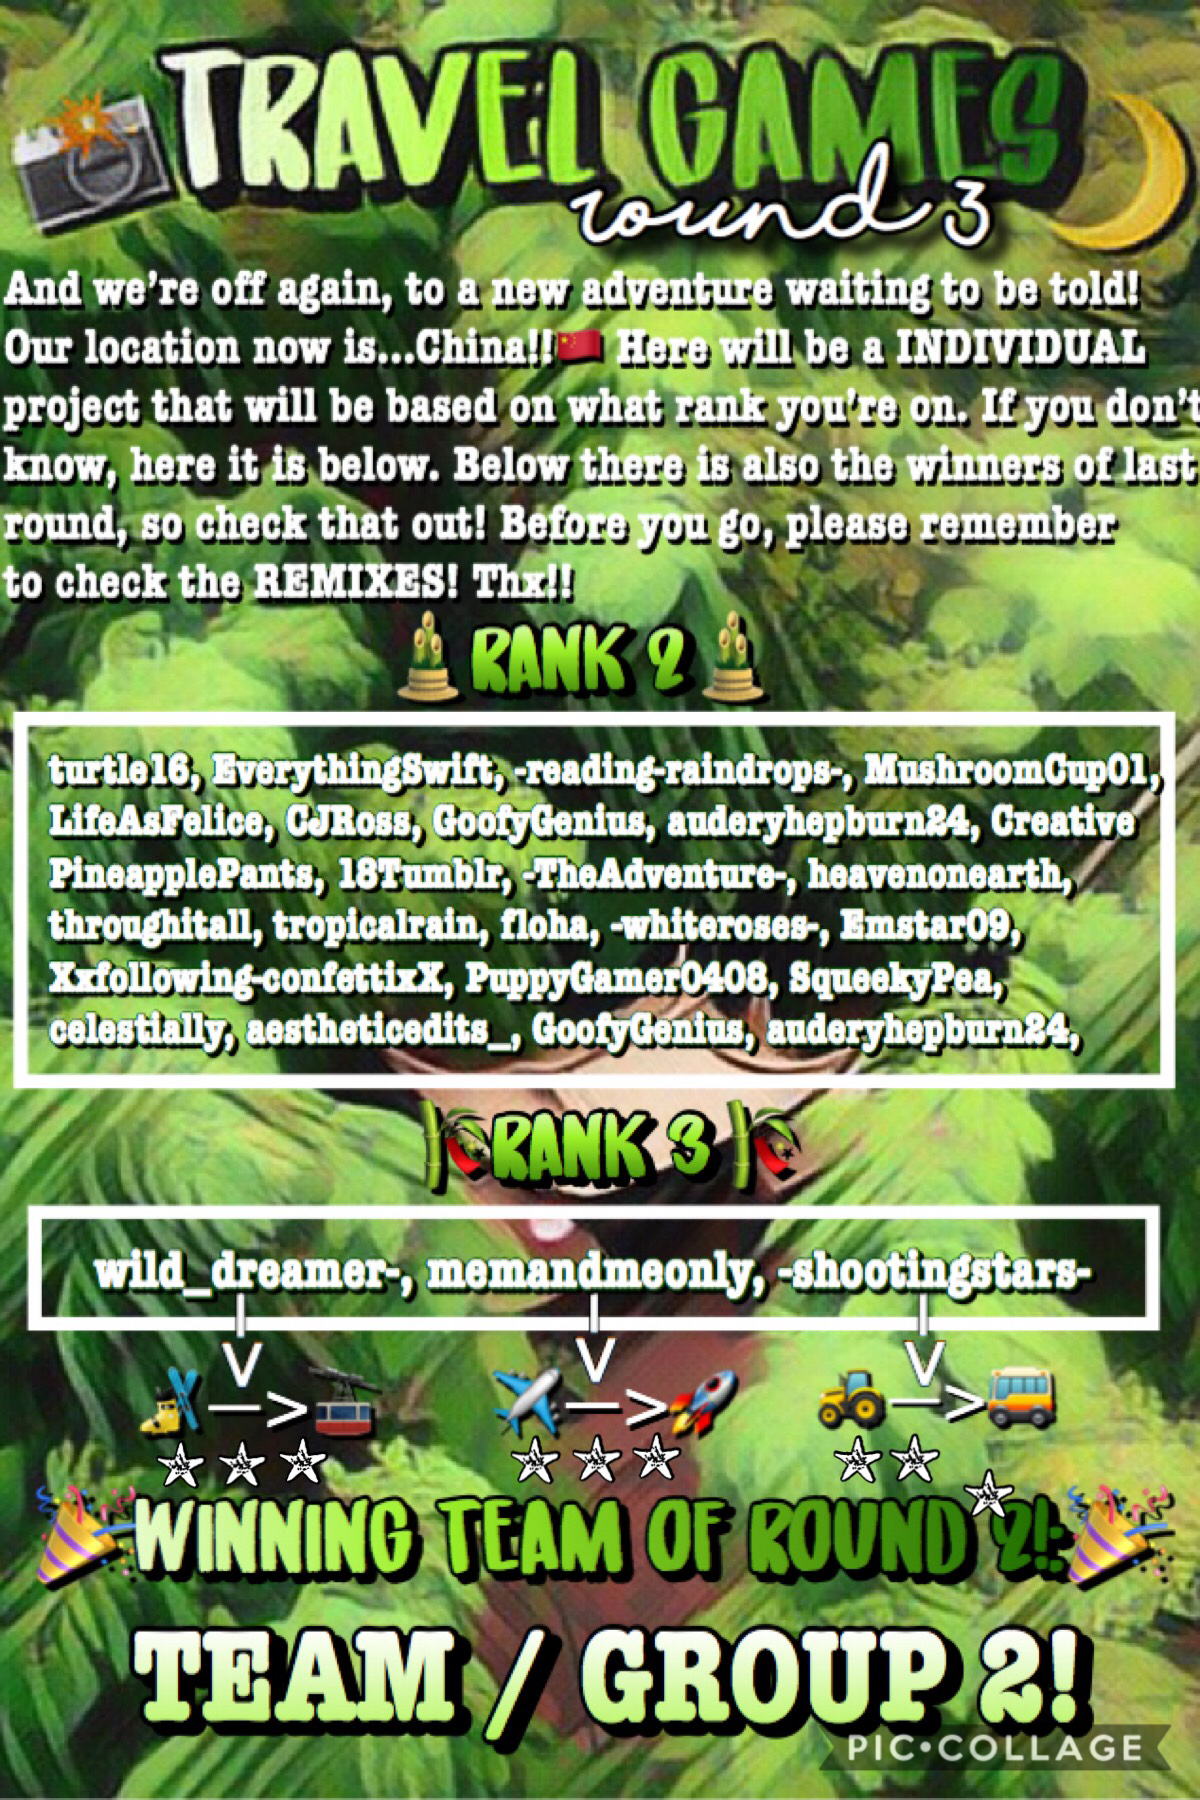 🎋yeeet it’s finally round 3! 🎋(sorry for the bad layout...and lateness..) pleassse read it all and check out the remixes! congrats to the 3 people who are in rank 3! also just fyi, there will probably be 2-4 more rounds!! please enter in asap!!! See ya an